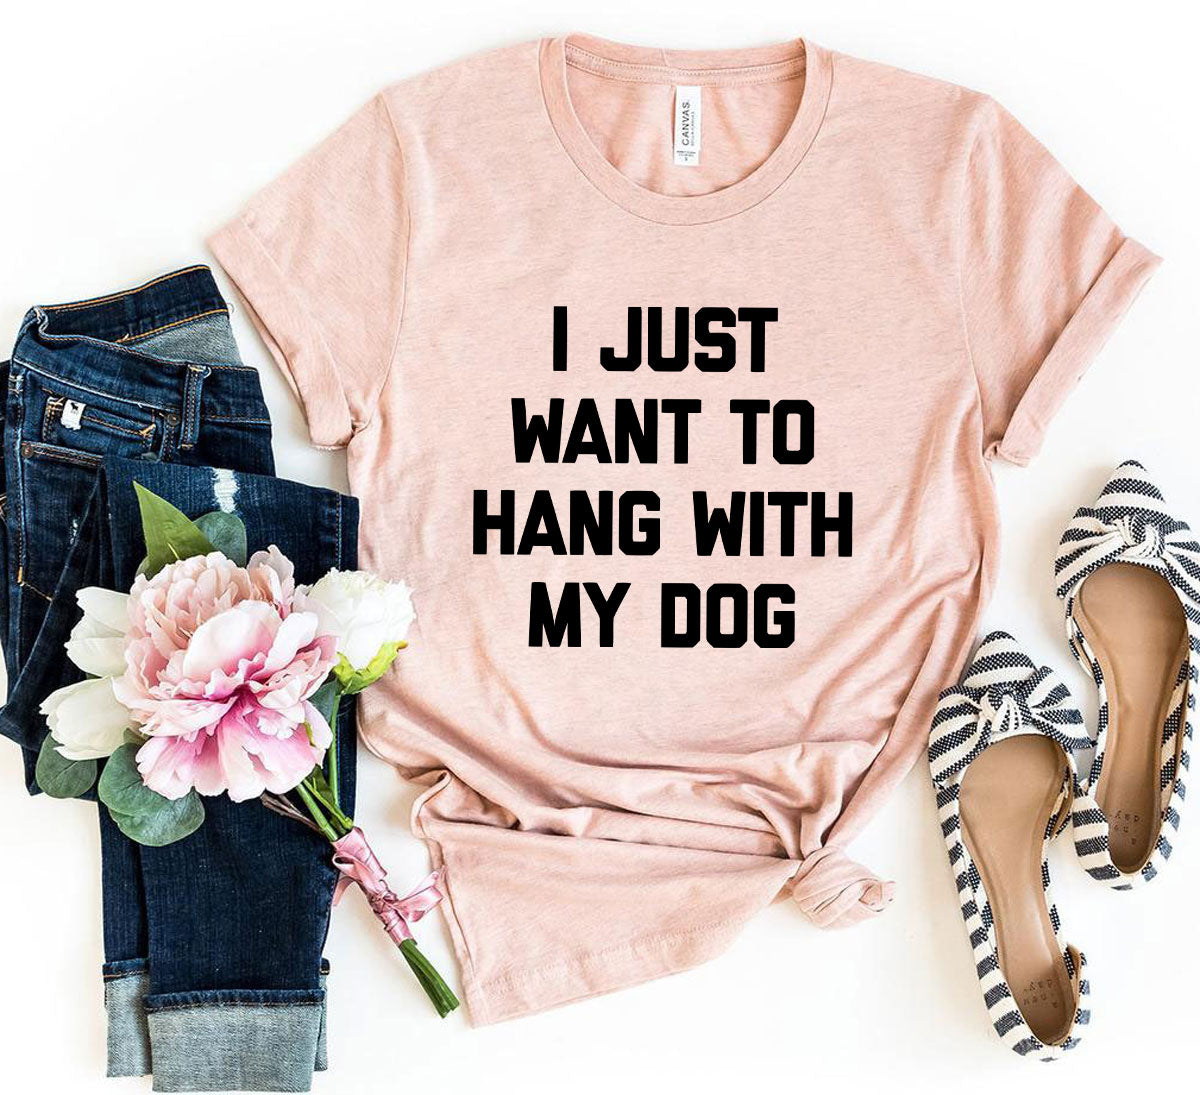 I Just Want To Hang With My Dog Graphic T-Shirt - All Good Laces